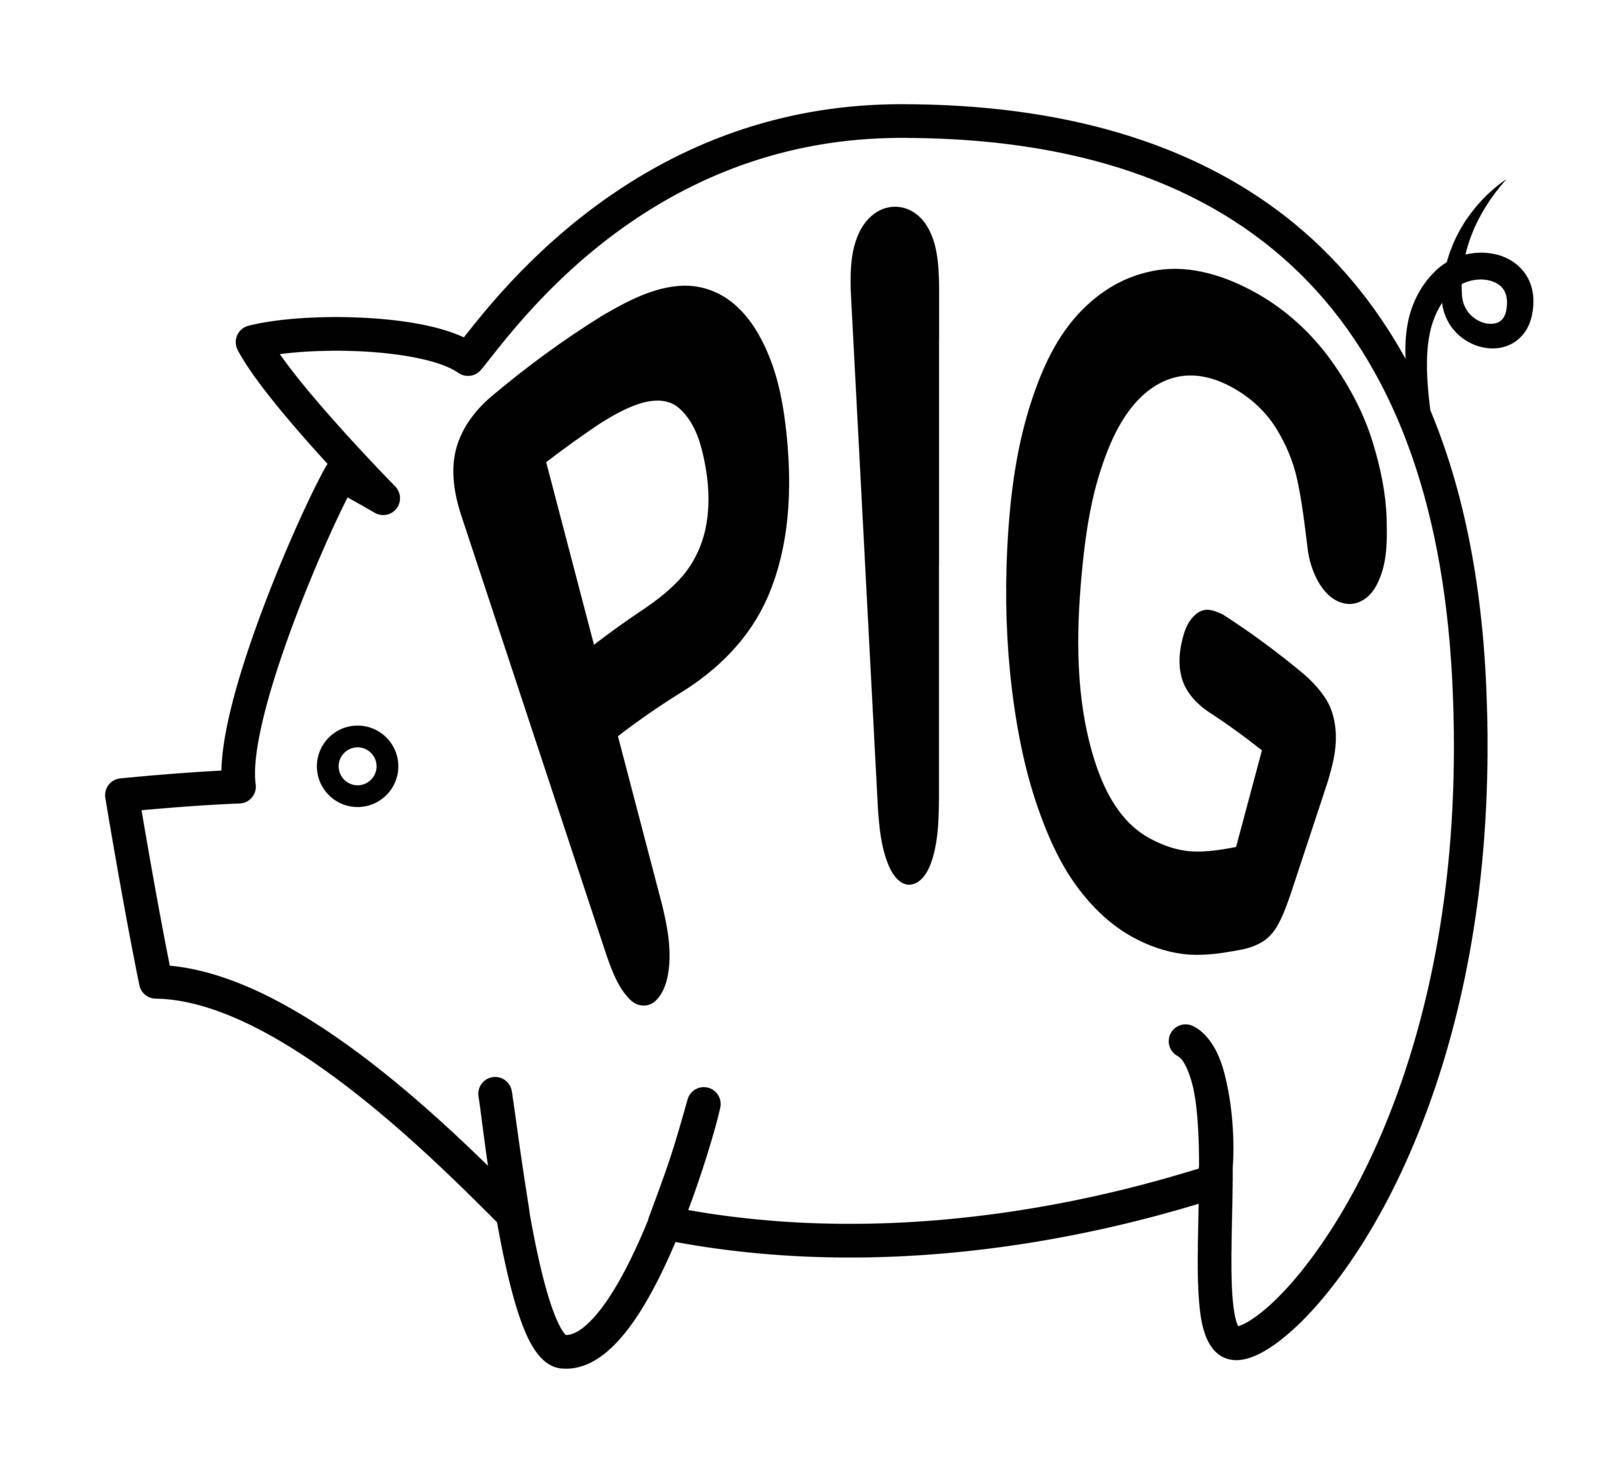 Big pig background. The contrast image. Cartoon flat characters. Vector illustration.